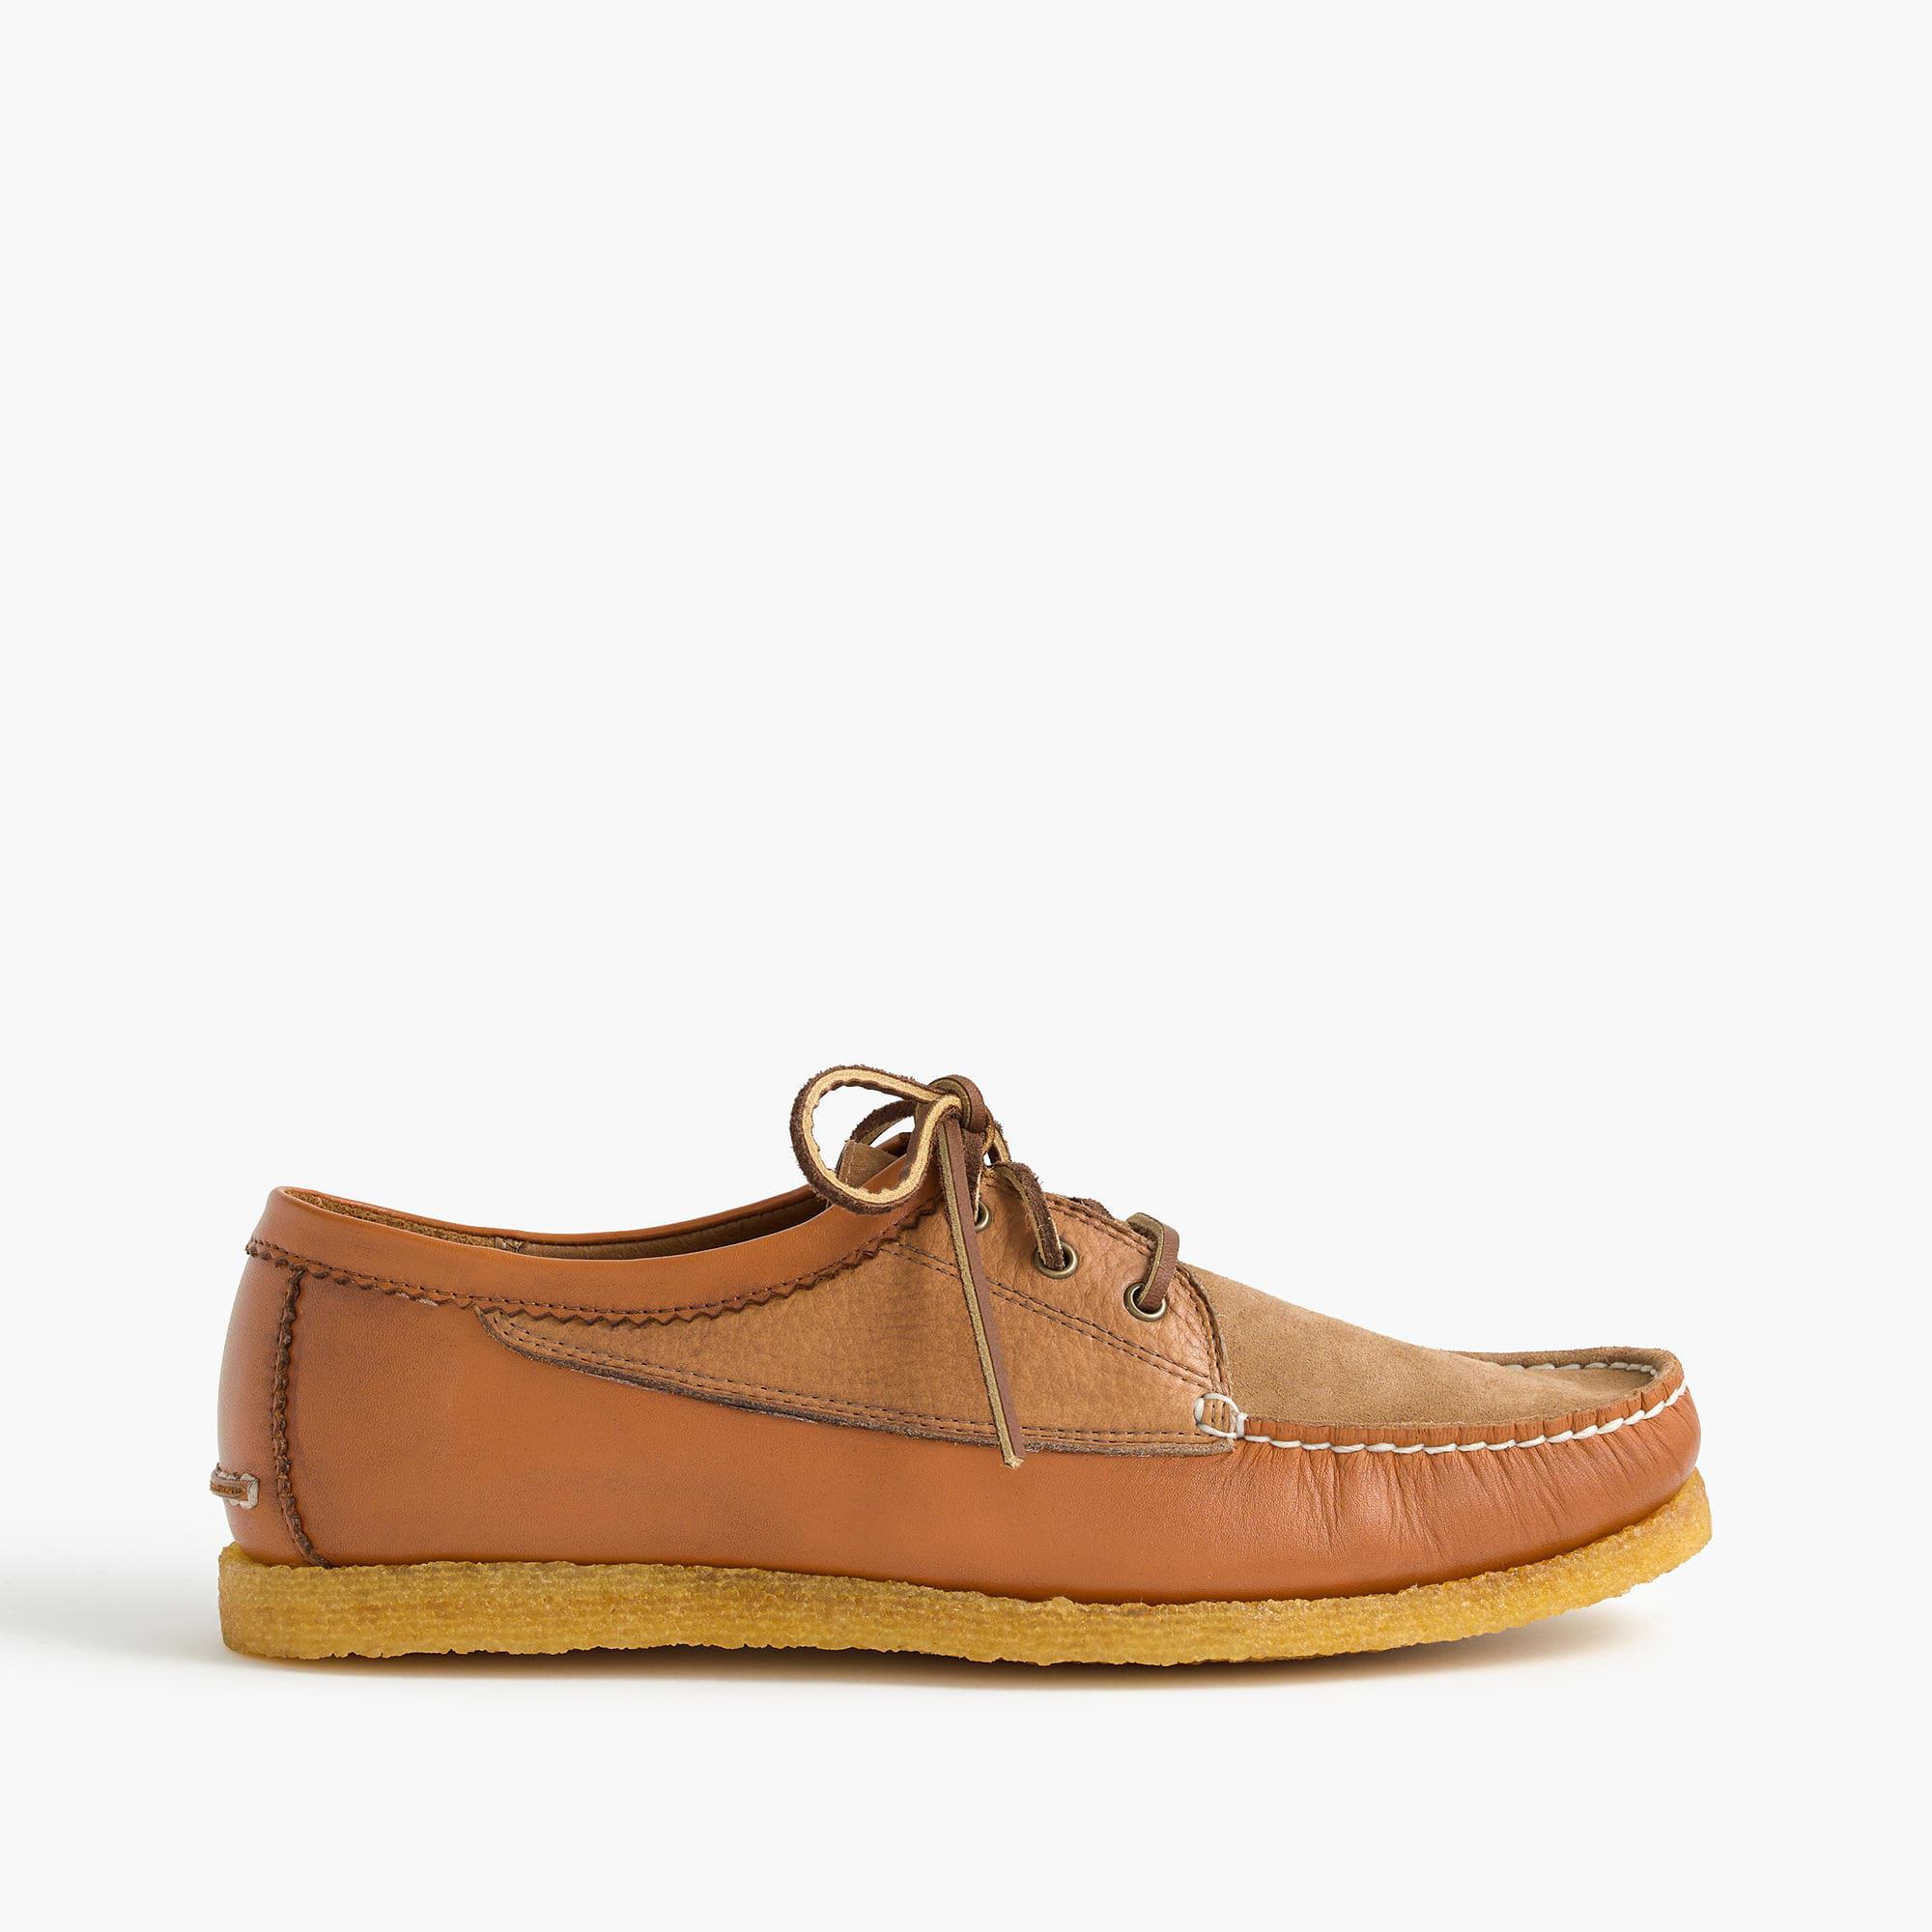 J.Crew Wallace & Barnes Crepe-sole Moccasins With 3 Eyelets in Brown ...